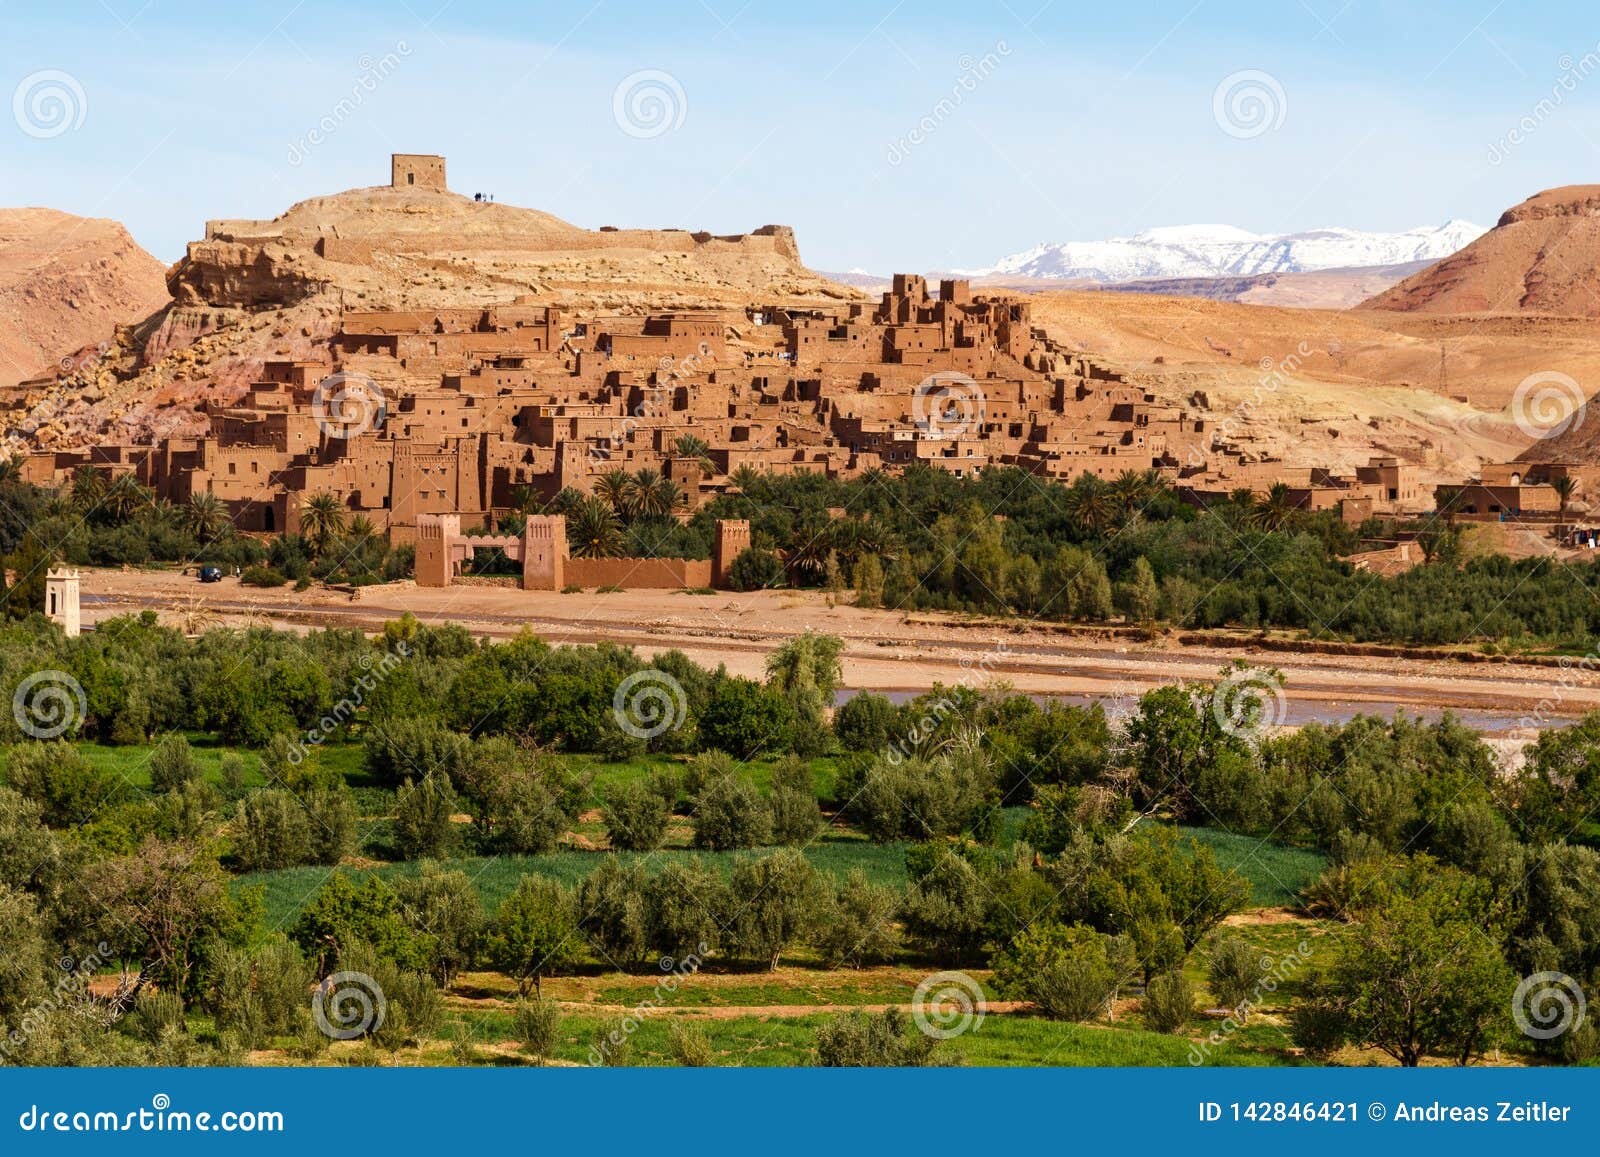 Fortified City Along the Former Caravan Route between the Sahara and  Marrakech in Morocco with Snow Covered Atlas Mountain Range Stock Image -  Image of ksar, building: 142846421